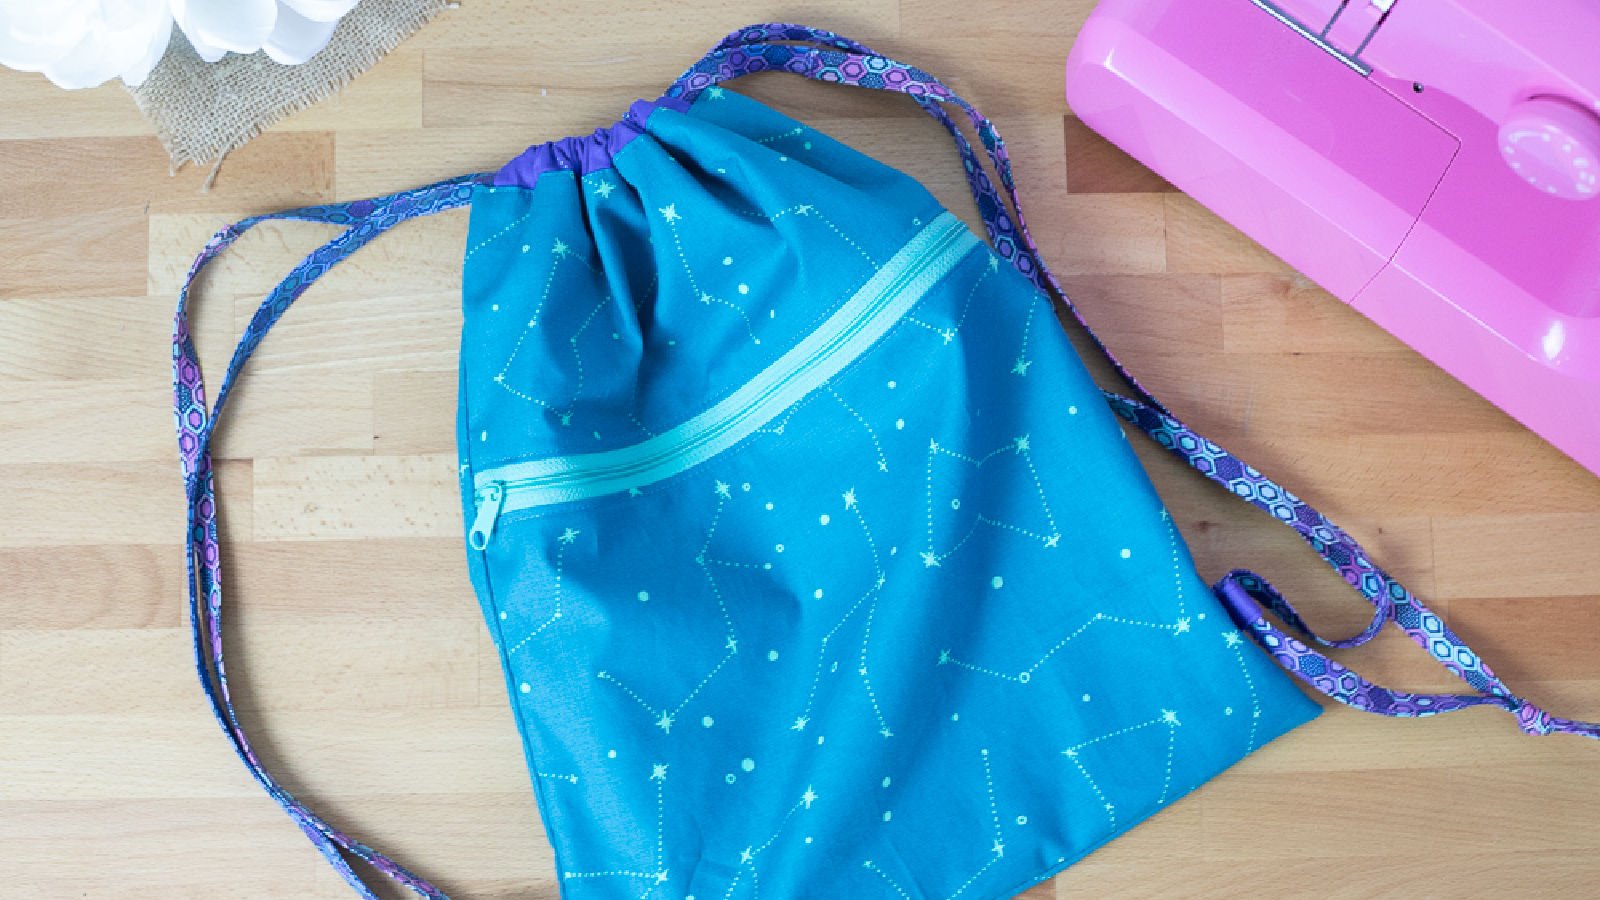 <p>My kids are teenagers and young adults, but they still love the drawstring backpacks I make. This <a href="https://sewcanshe.com/easy-peasy-backpack-with-a-zipper-pocket-free-tutorial/" rel="noreferrer noopener">backpack with a zippered pocket</a> is especially handy for travel.</p>